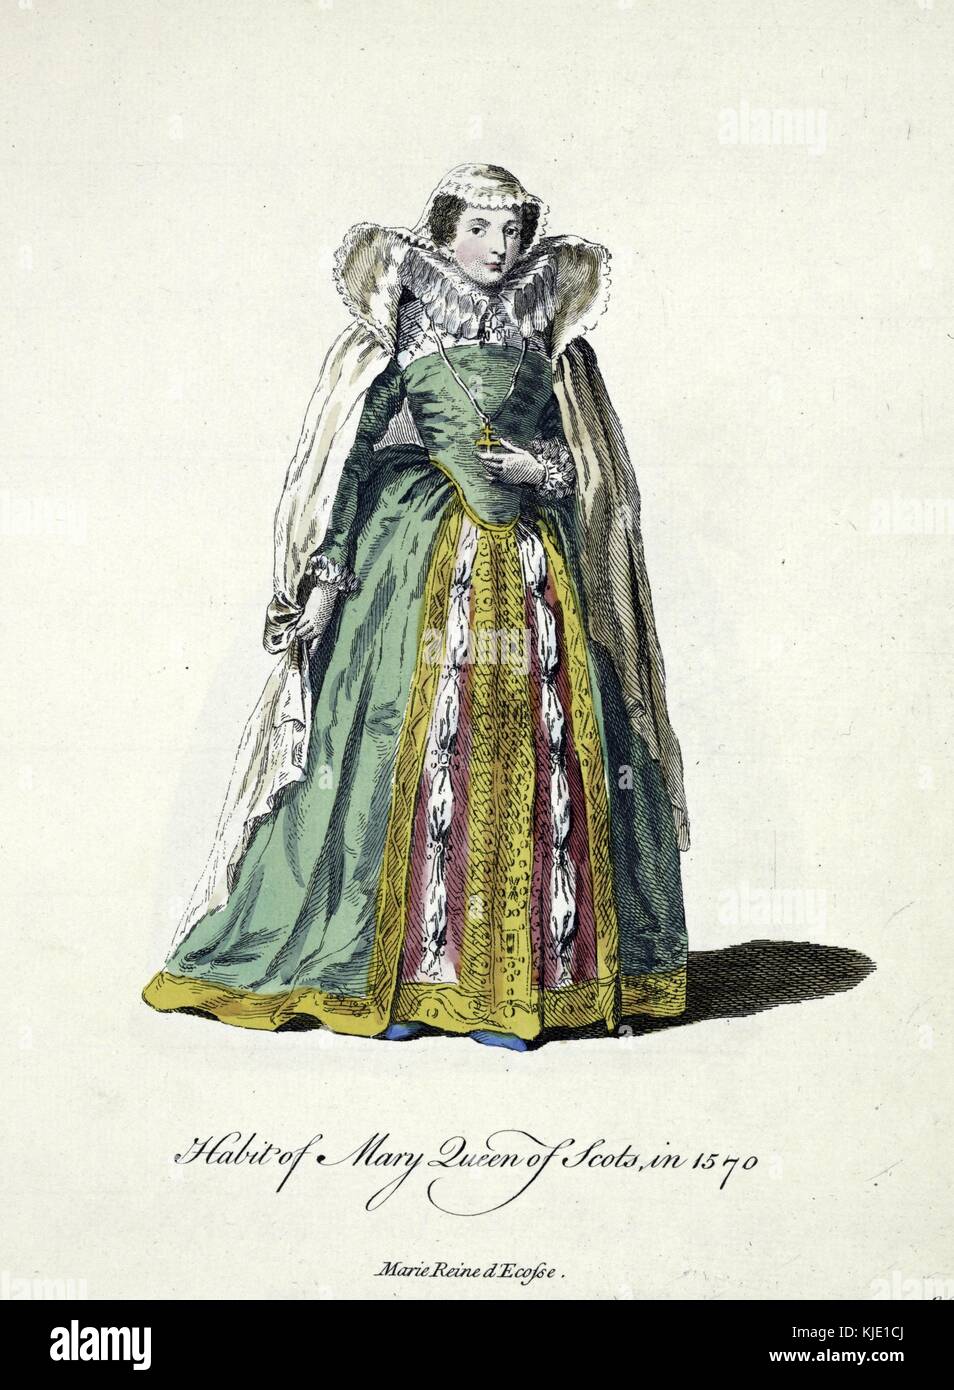 Hand colored engraving of Mary Queen of Scots, titled 'Habit of Mary Queen of Scots in 1570, Marie reine d'Ecosse', depicting royal dresswear, with wide pleated collar, cape, and veil, 1764. From the New York Public Library. Stock Photo